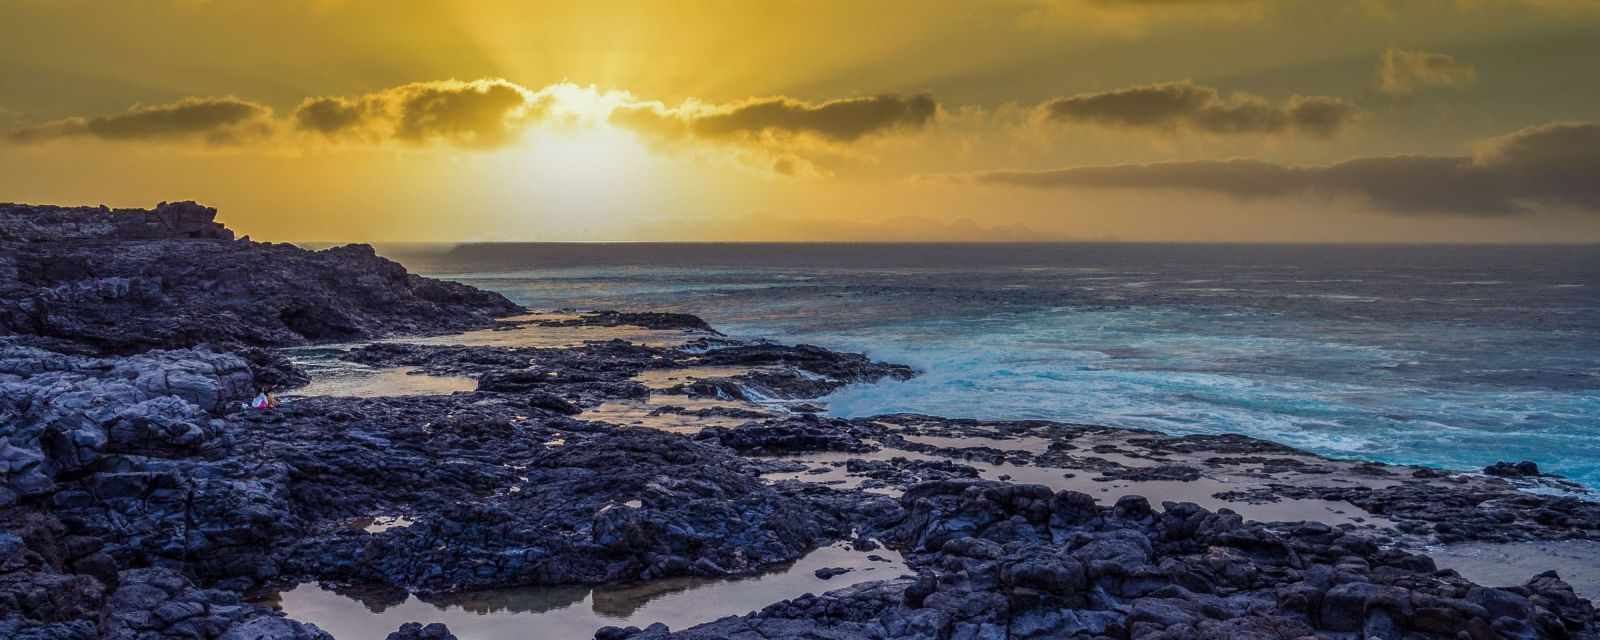 Lanzarote Best Beaches - Best Time and Sunsets